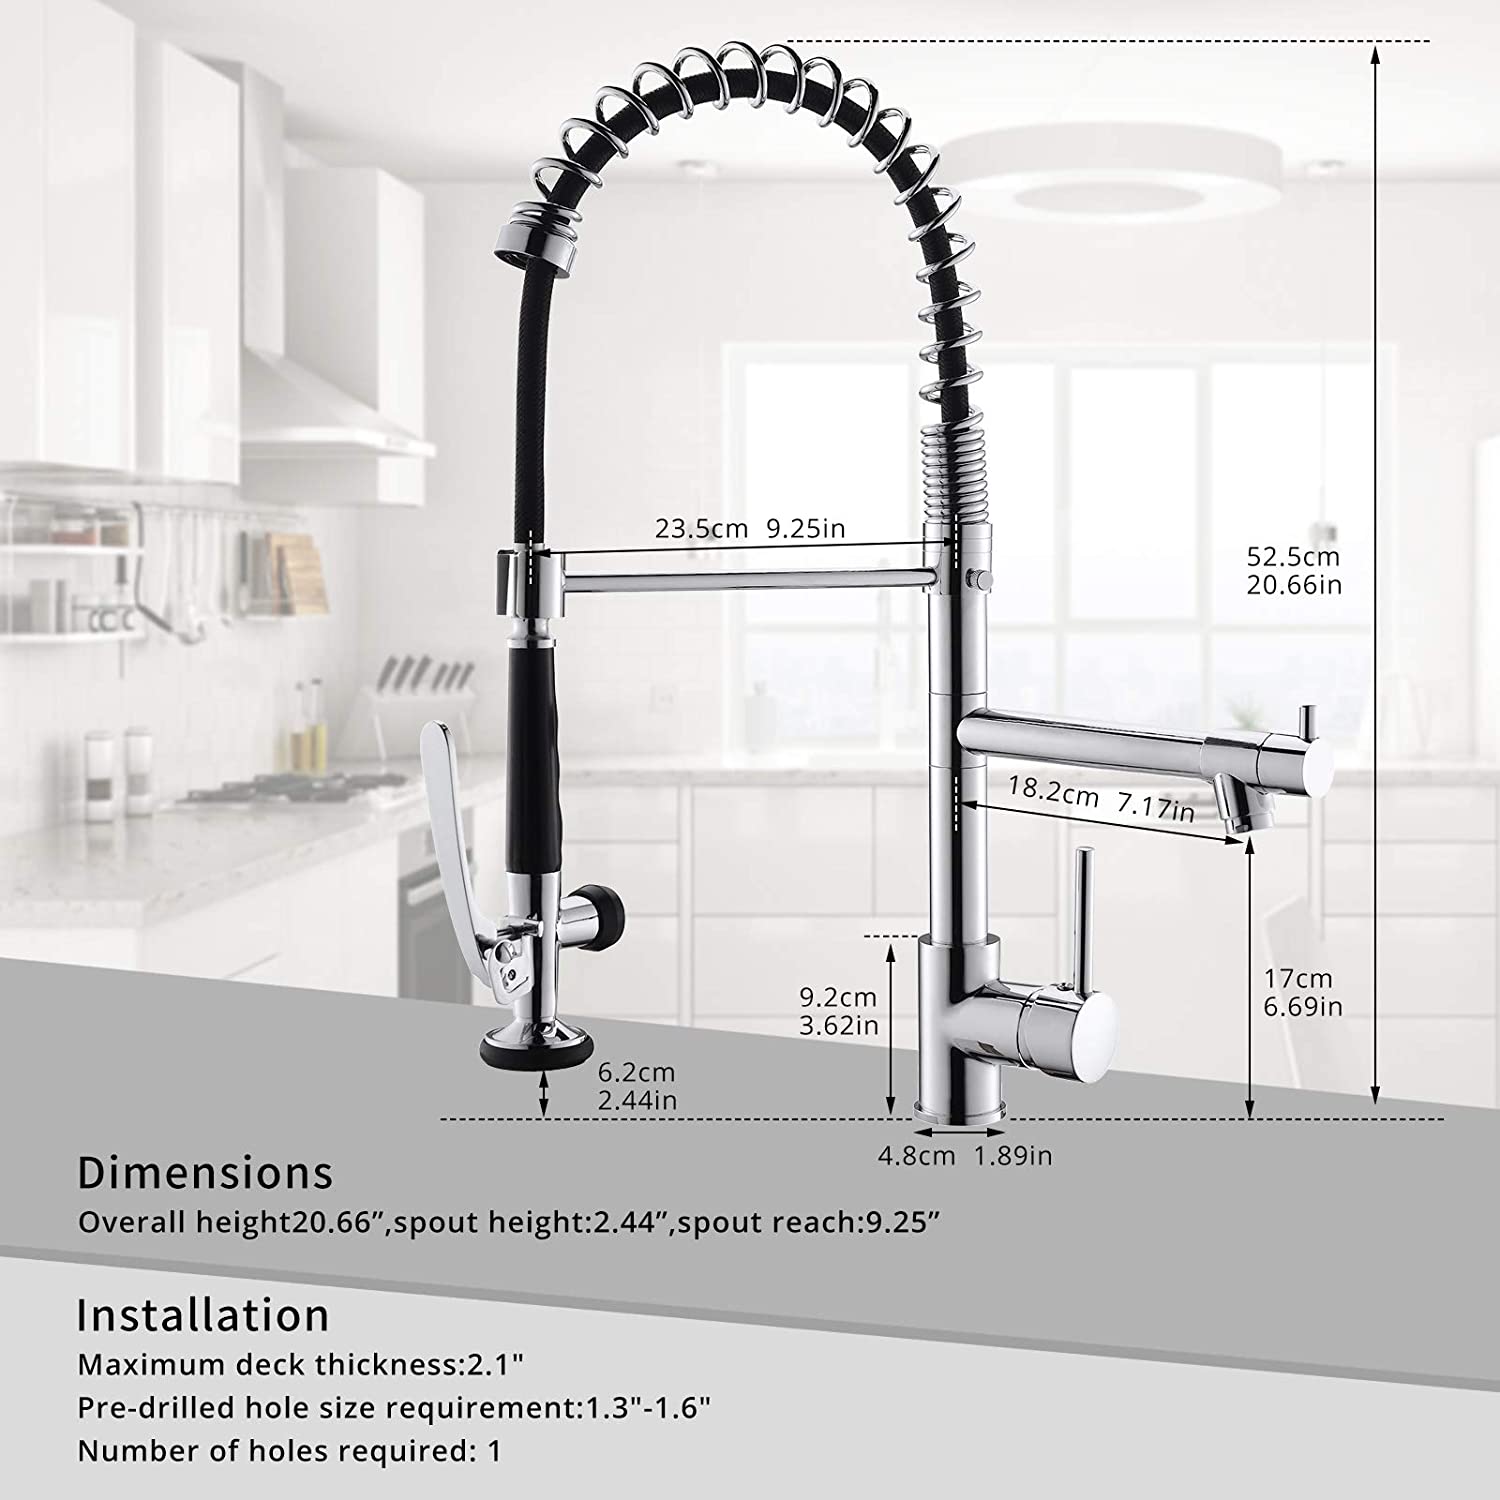 FLG Chrome Kitchen Faucet with Sprayer,Commercial Single Handle Pull Down Kitchen Sink Faucet